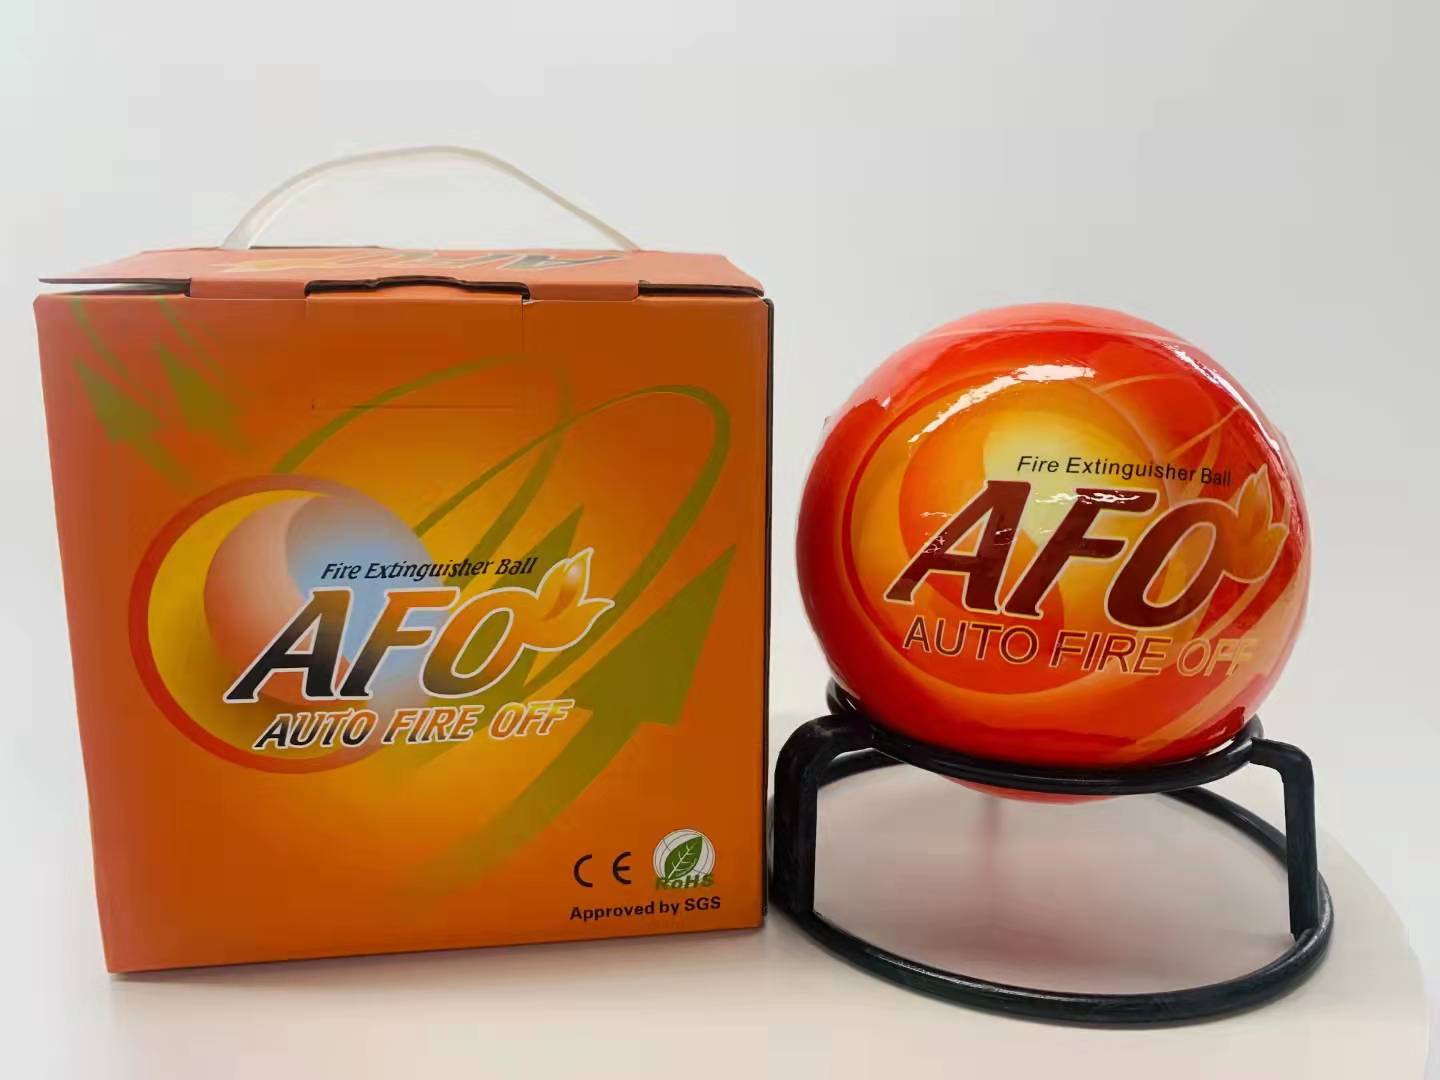 Odm Throwable Fire Extinguisher Ball For Family